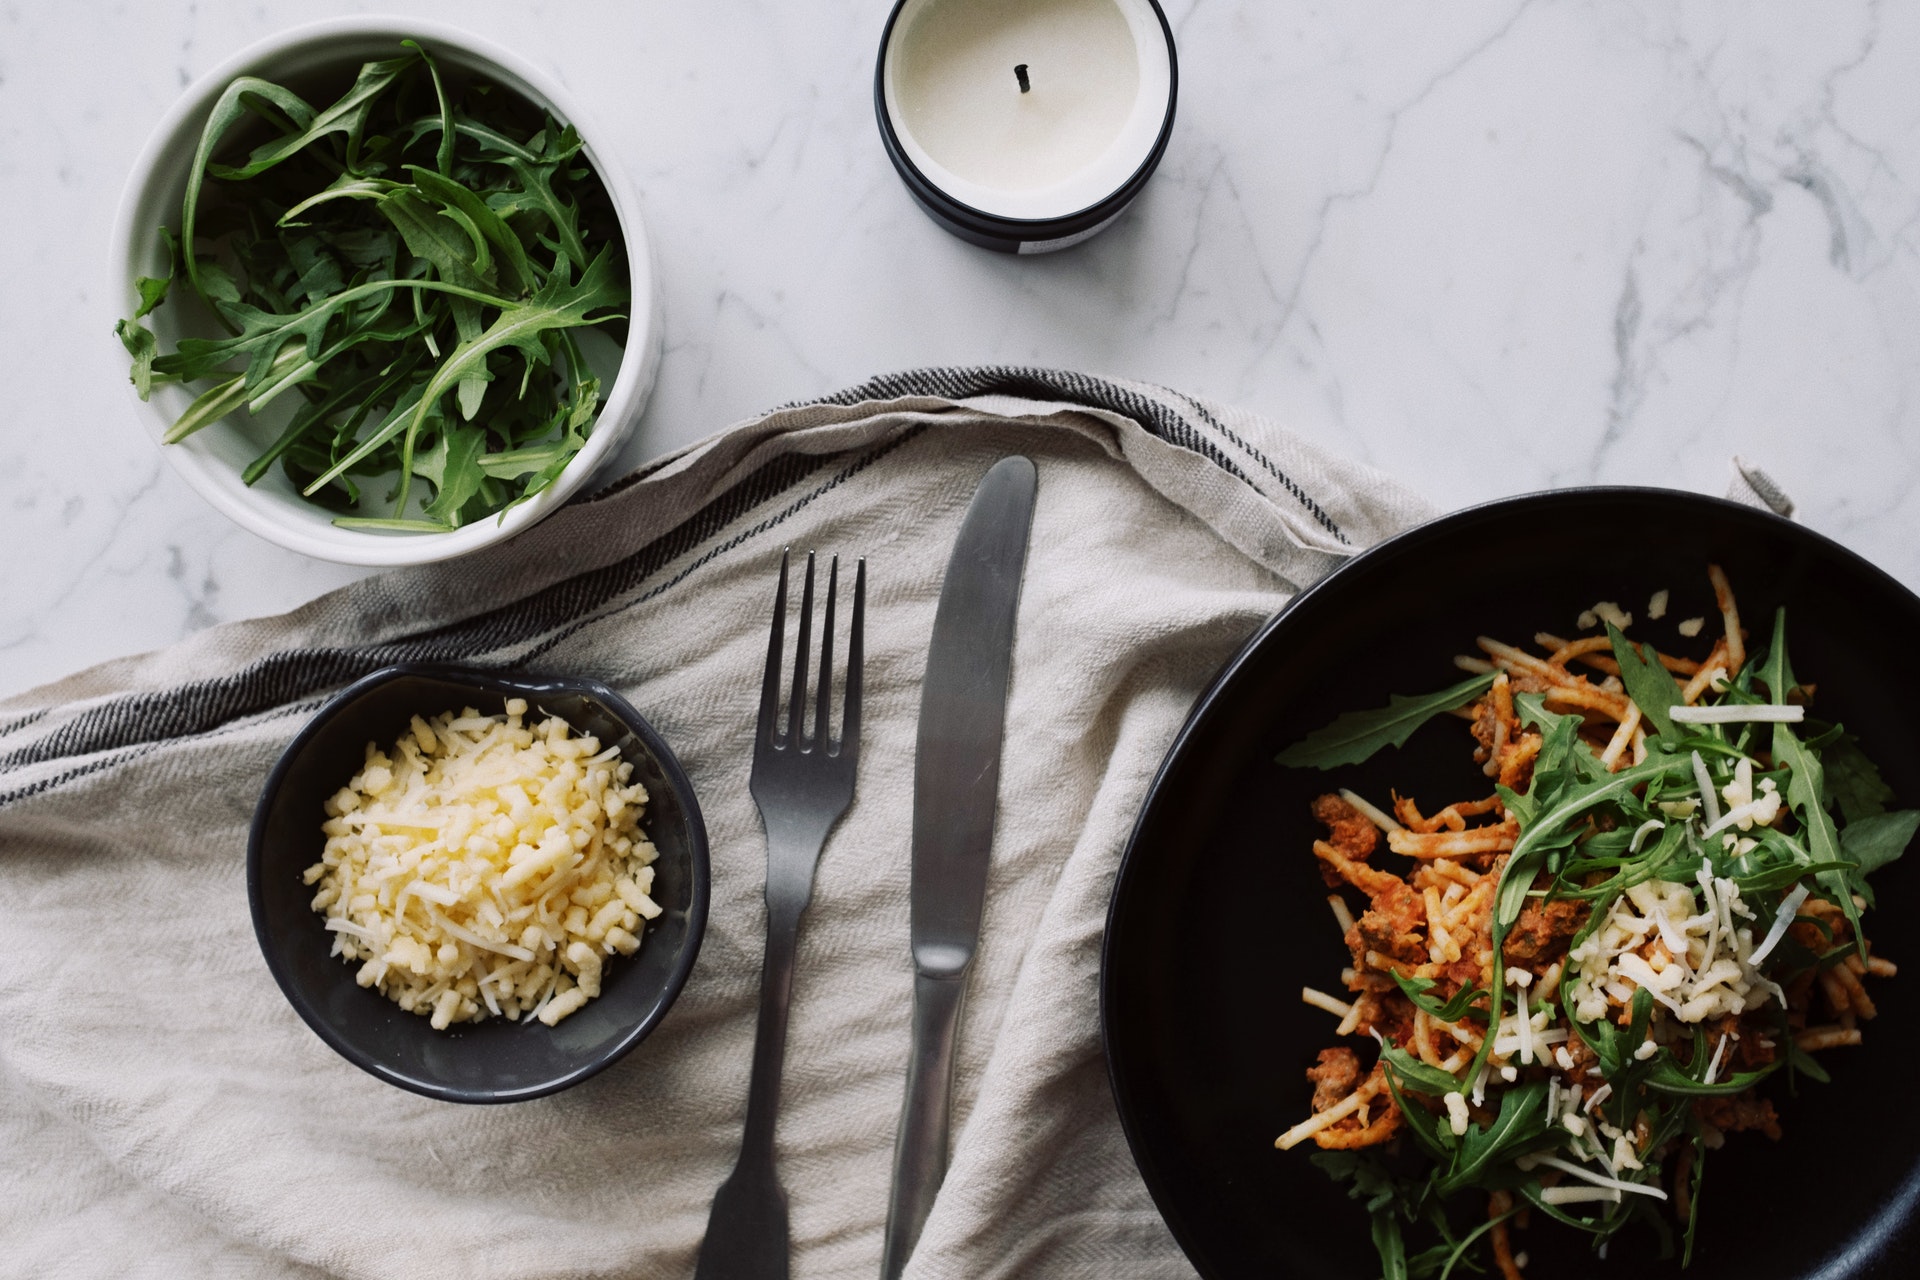 appetizing-meal-served-with-cheese-and-arugula-on-table-3851122.jpg